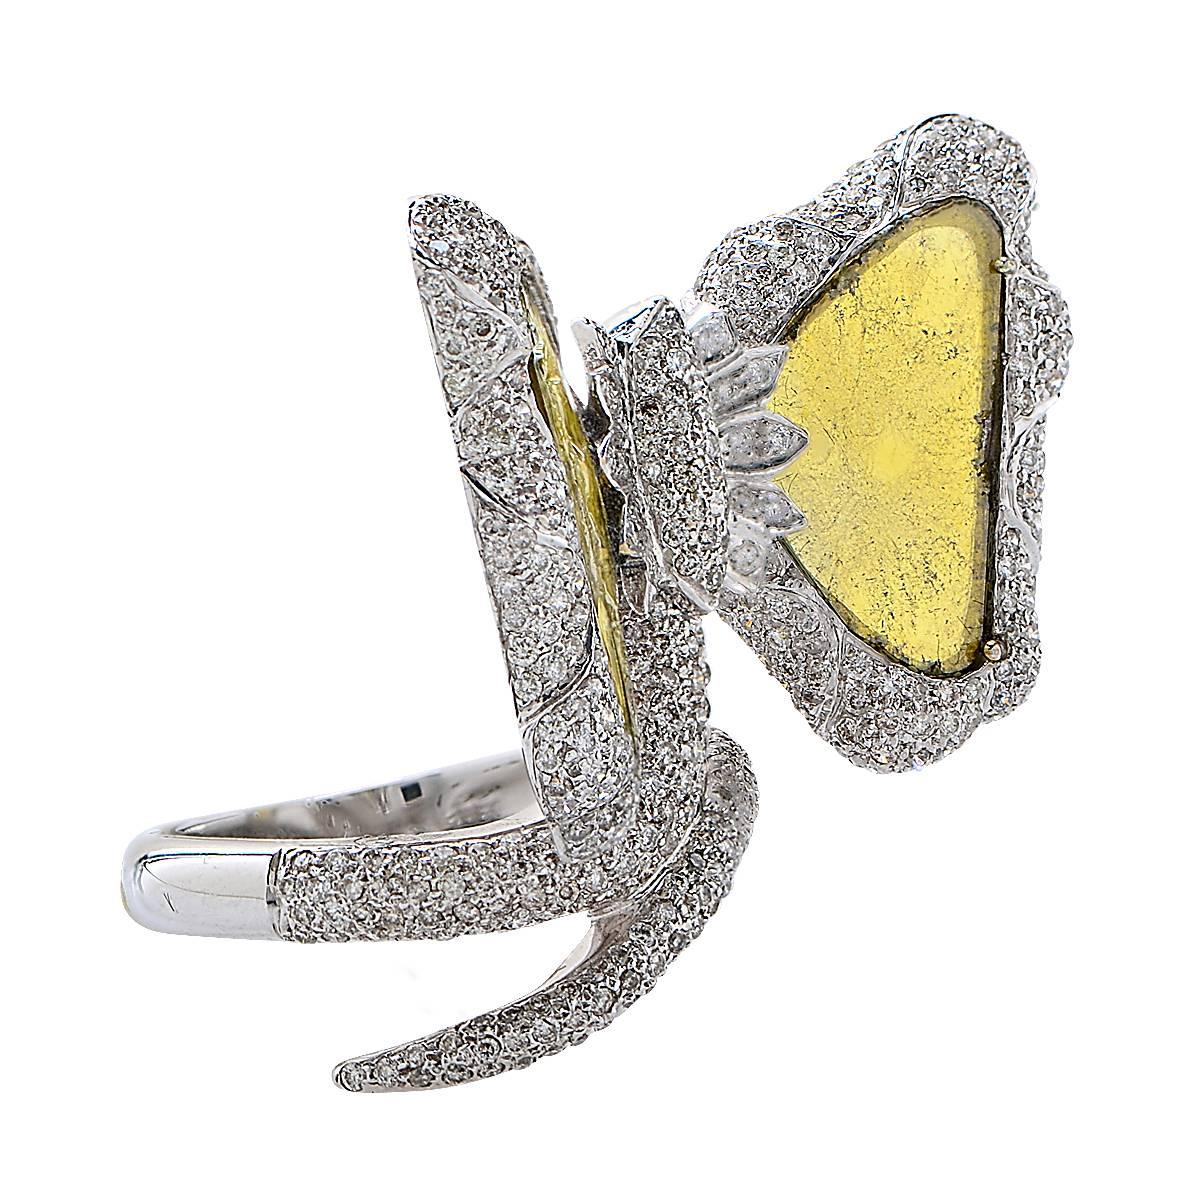 This beautiful diamond slice ring is crafted in 18k white gold and set with two natural yellow diamond slices surrounded by white round brilliant cut pave diamonds. The total diamond weight is 4.77cts.

The ring is a size 7 and cannot be sized.
It